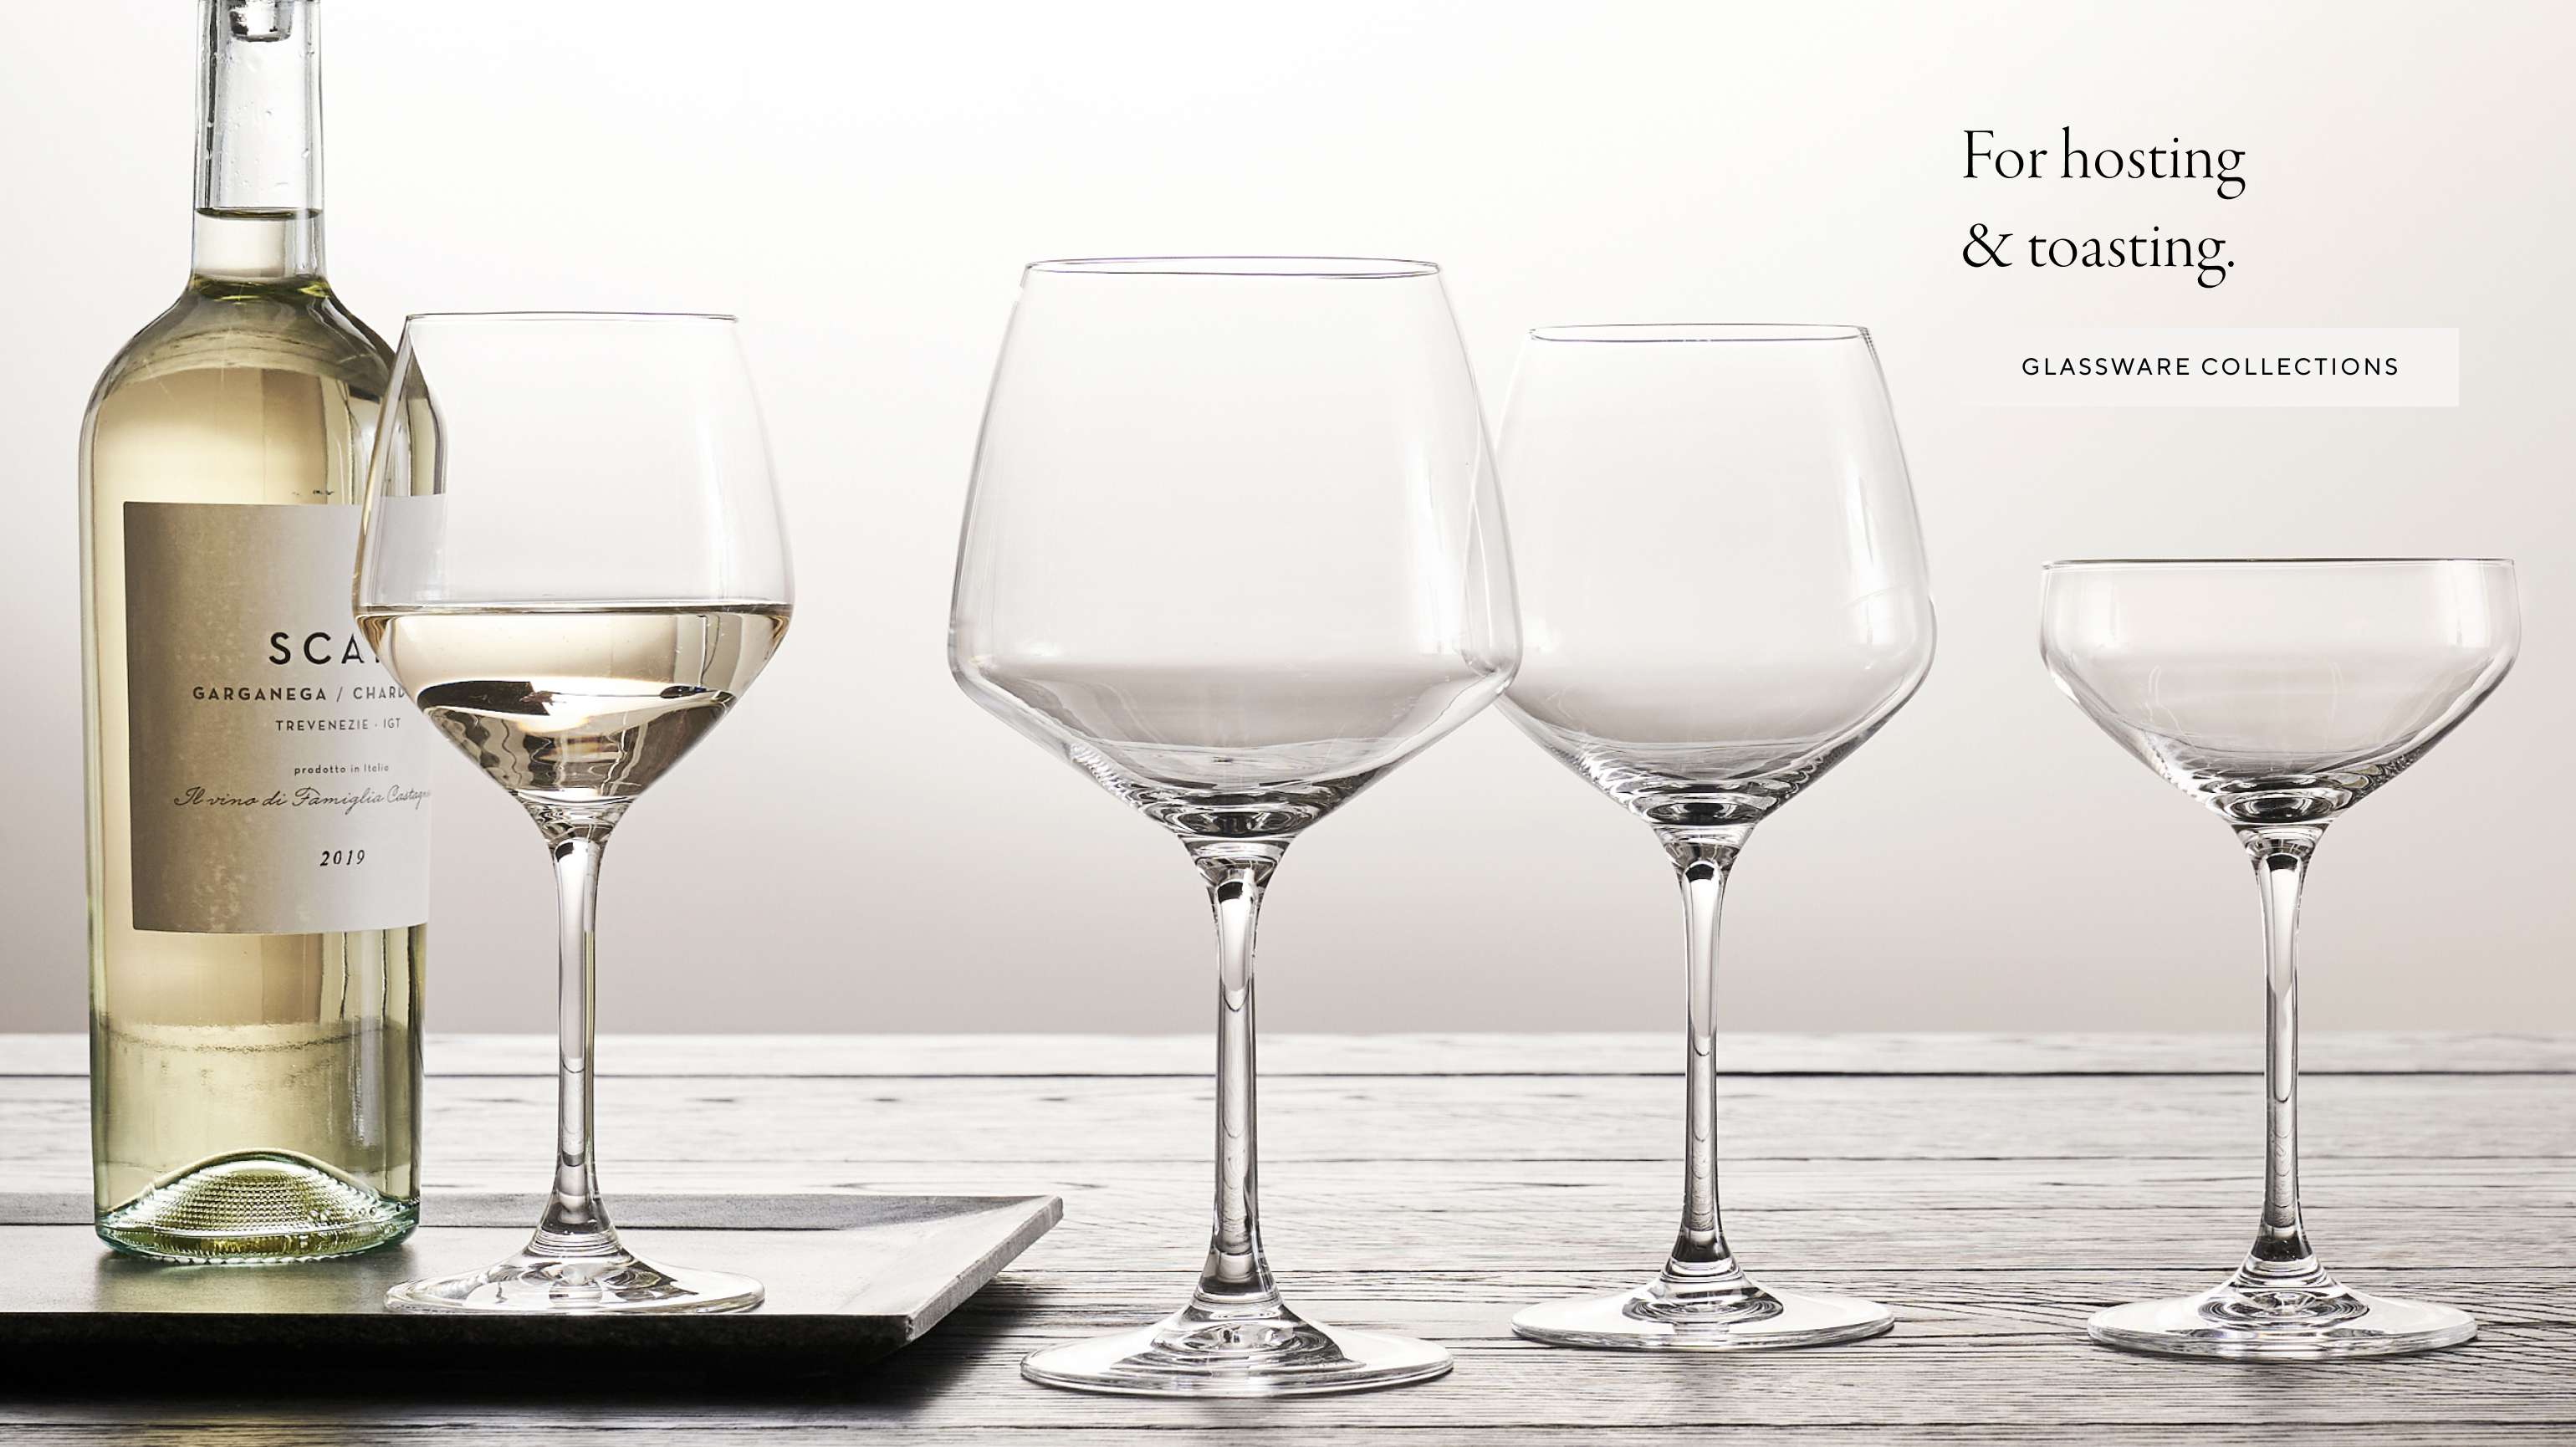 Glassware Collections